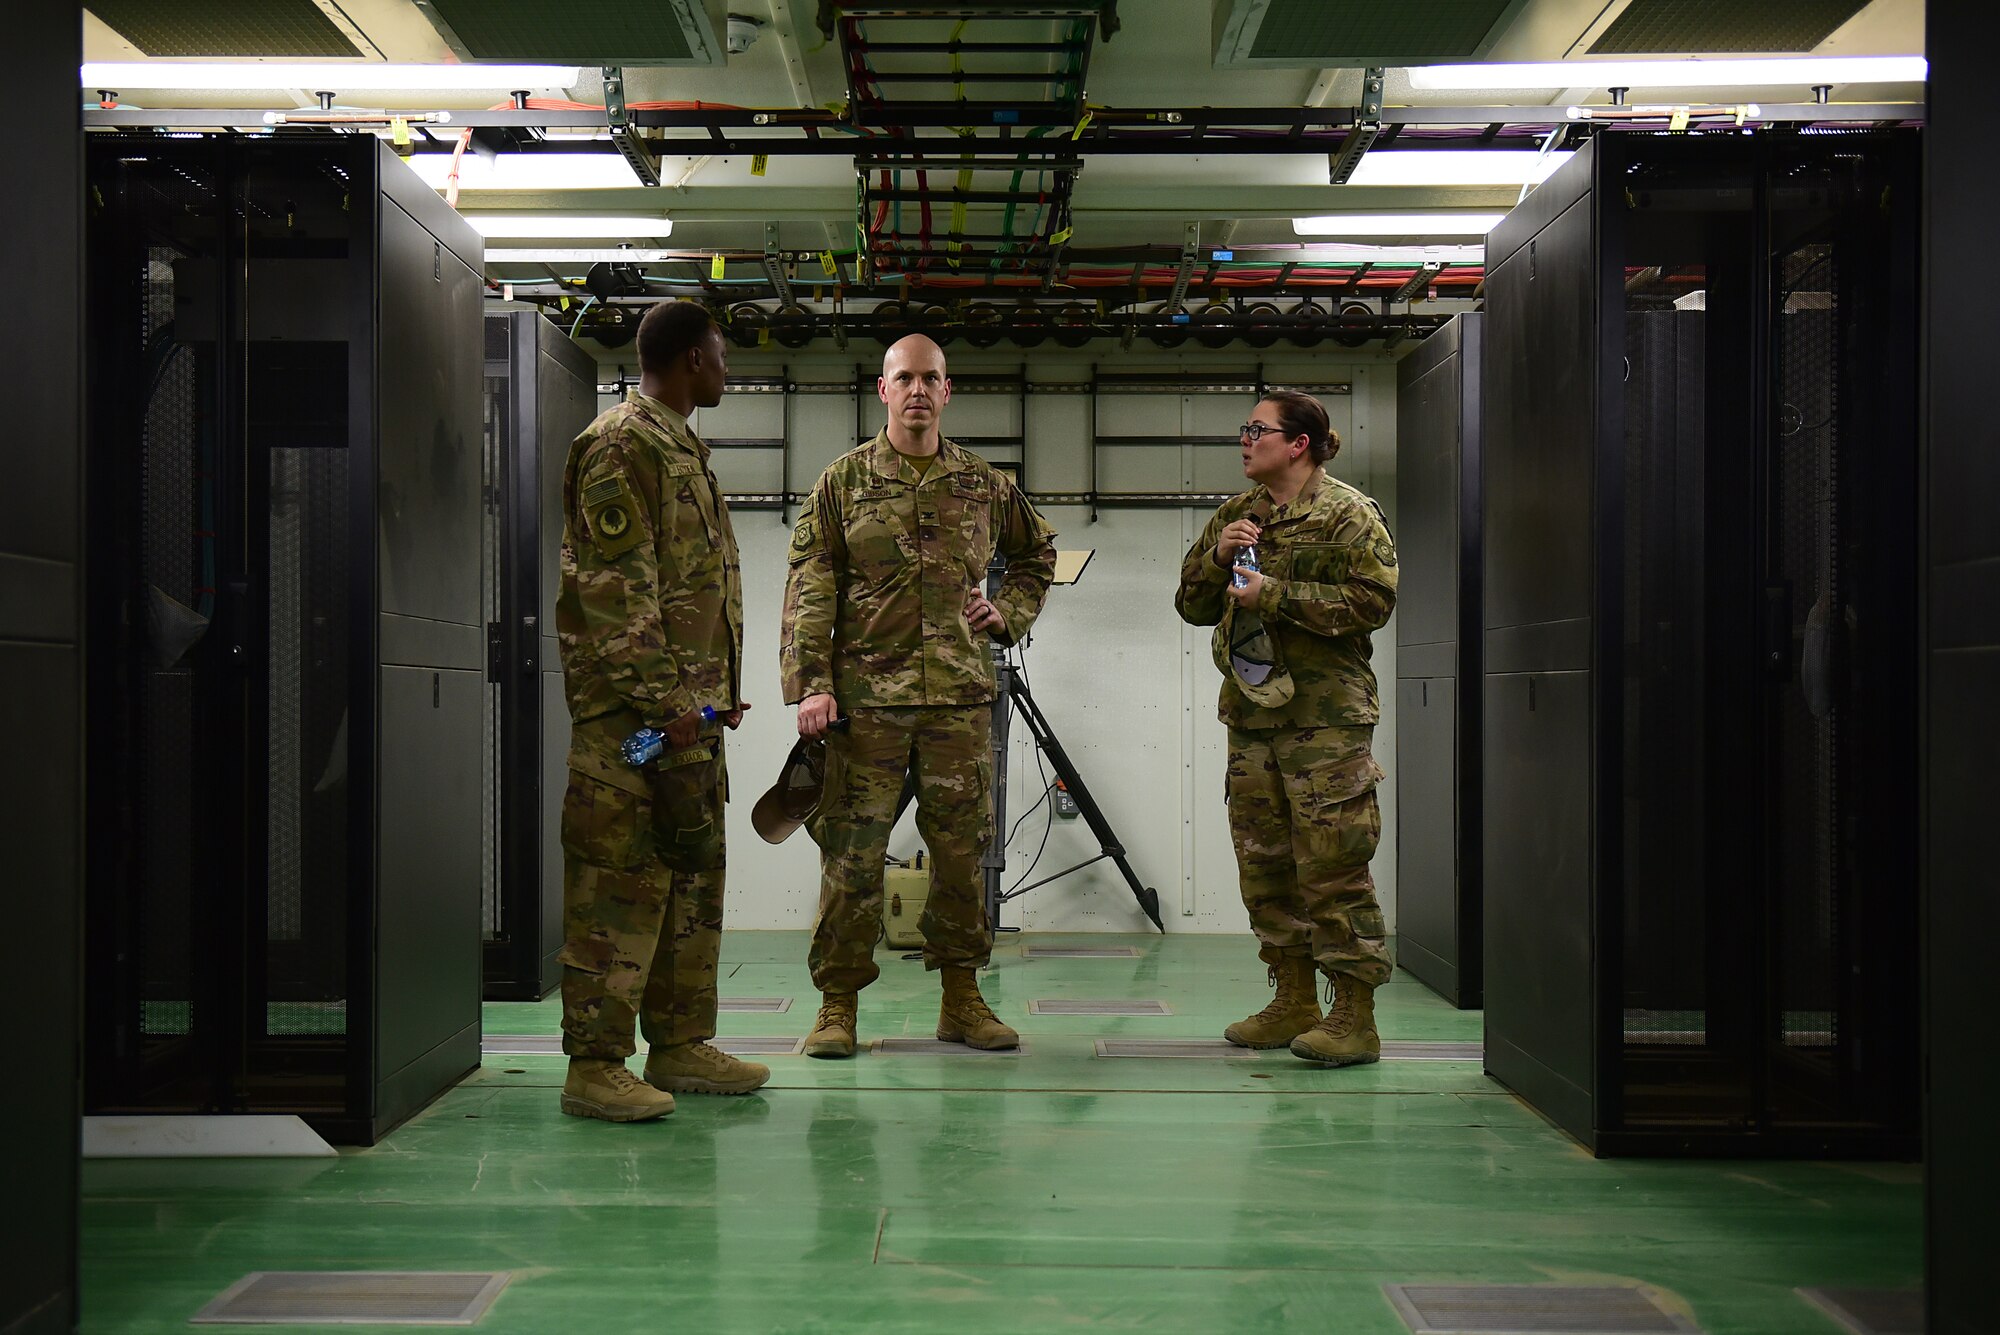 Three Airman stand in a brand new building